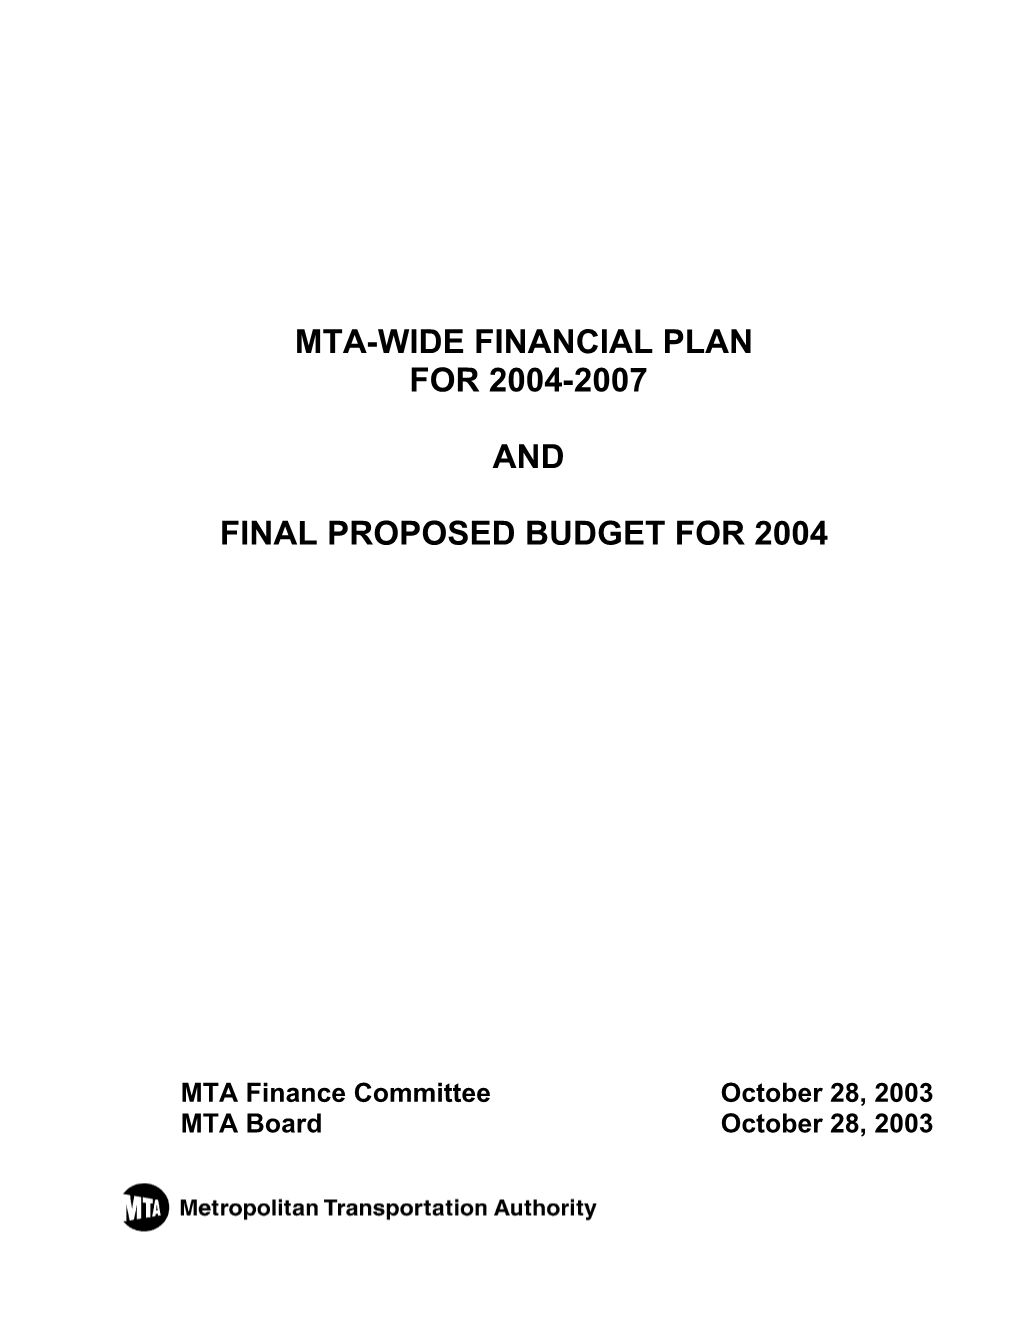 MTA-Wide Fin Plan for 2004-2007 & Final Proposed 2004 Budget